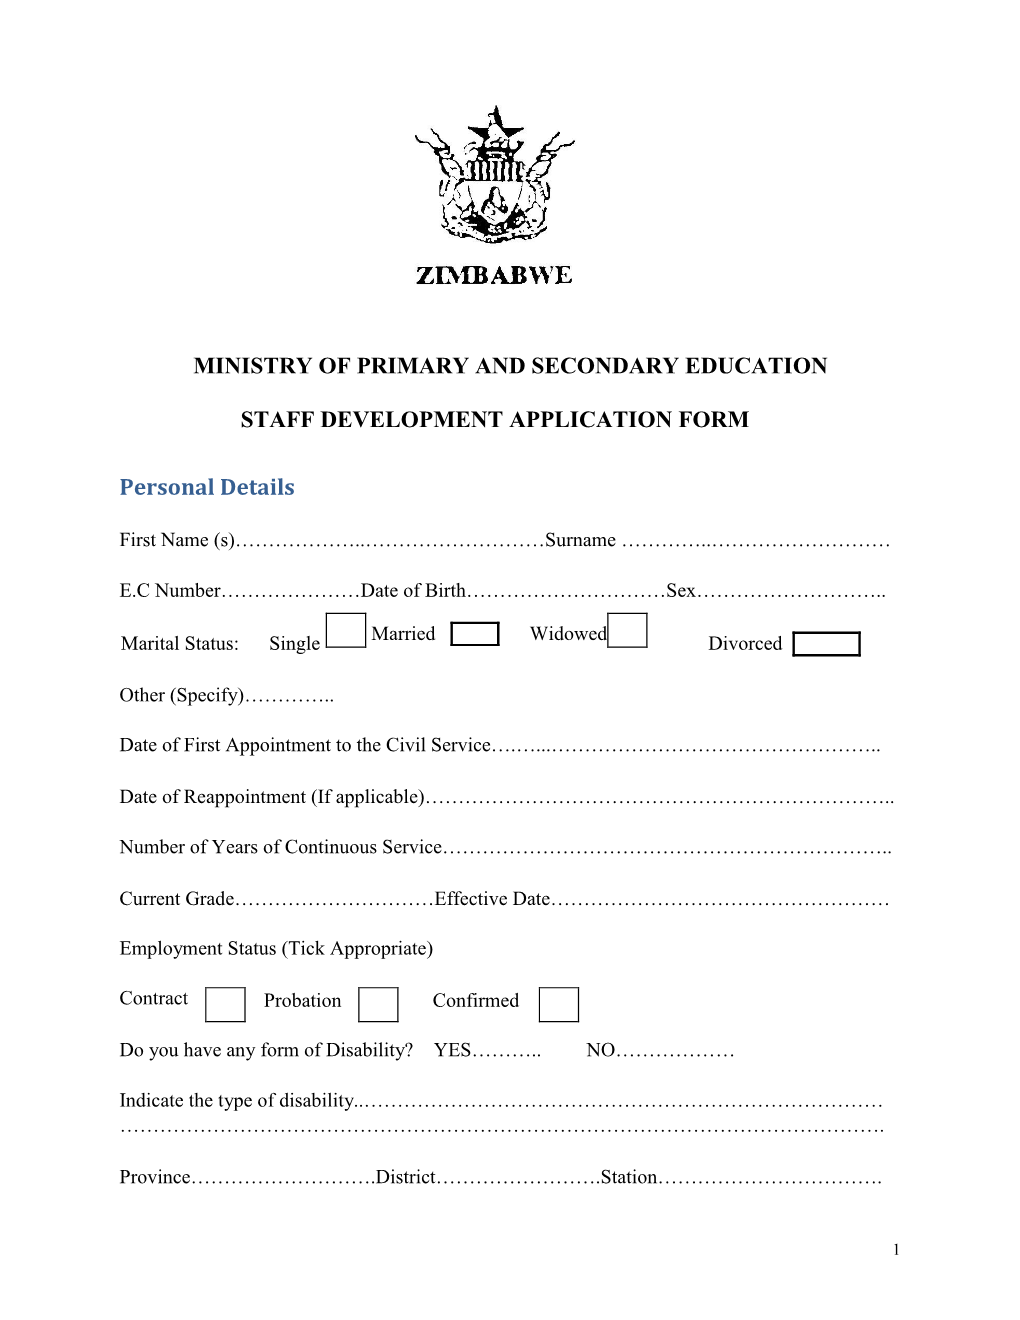 MINISTRY of PRIMARY and SECONDARY EDUCATION STAFF DEVELOPMENT APPLICATION FORM Personal Details